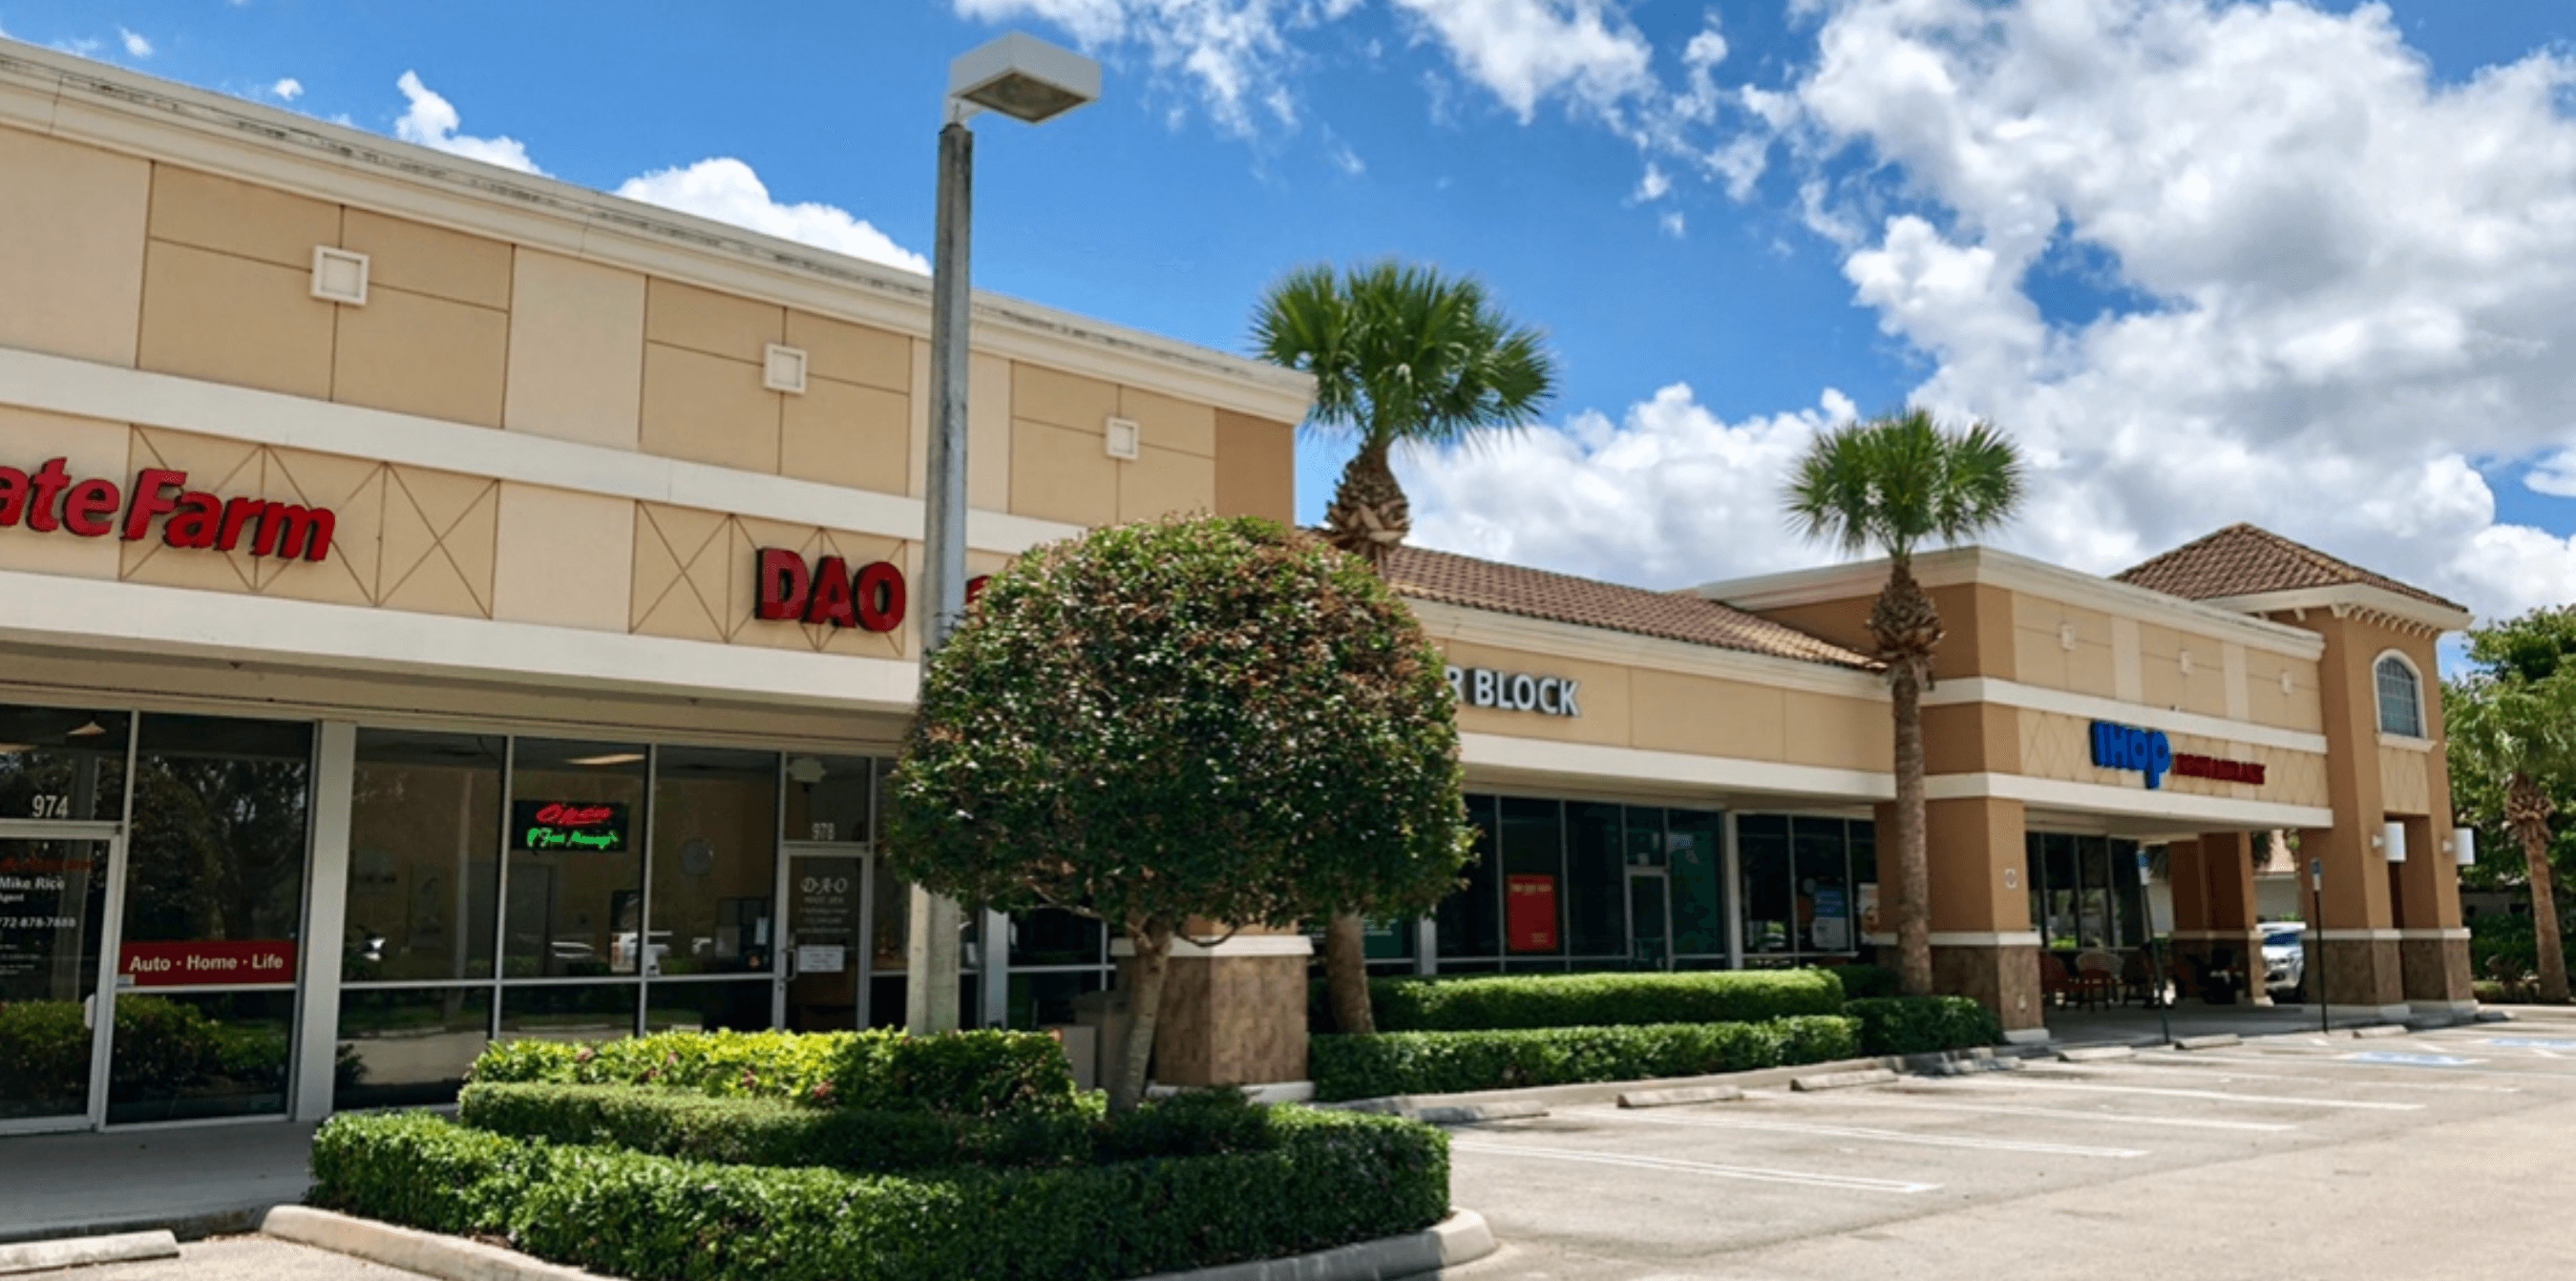 Strip Malls Are Strong Performers in the Real Estate Segment